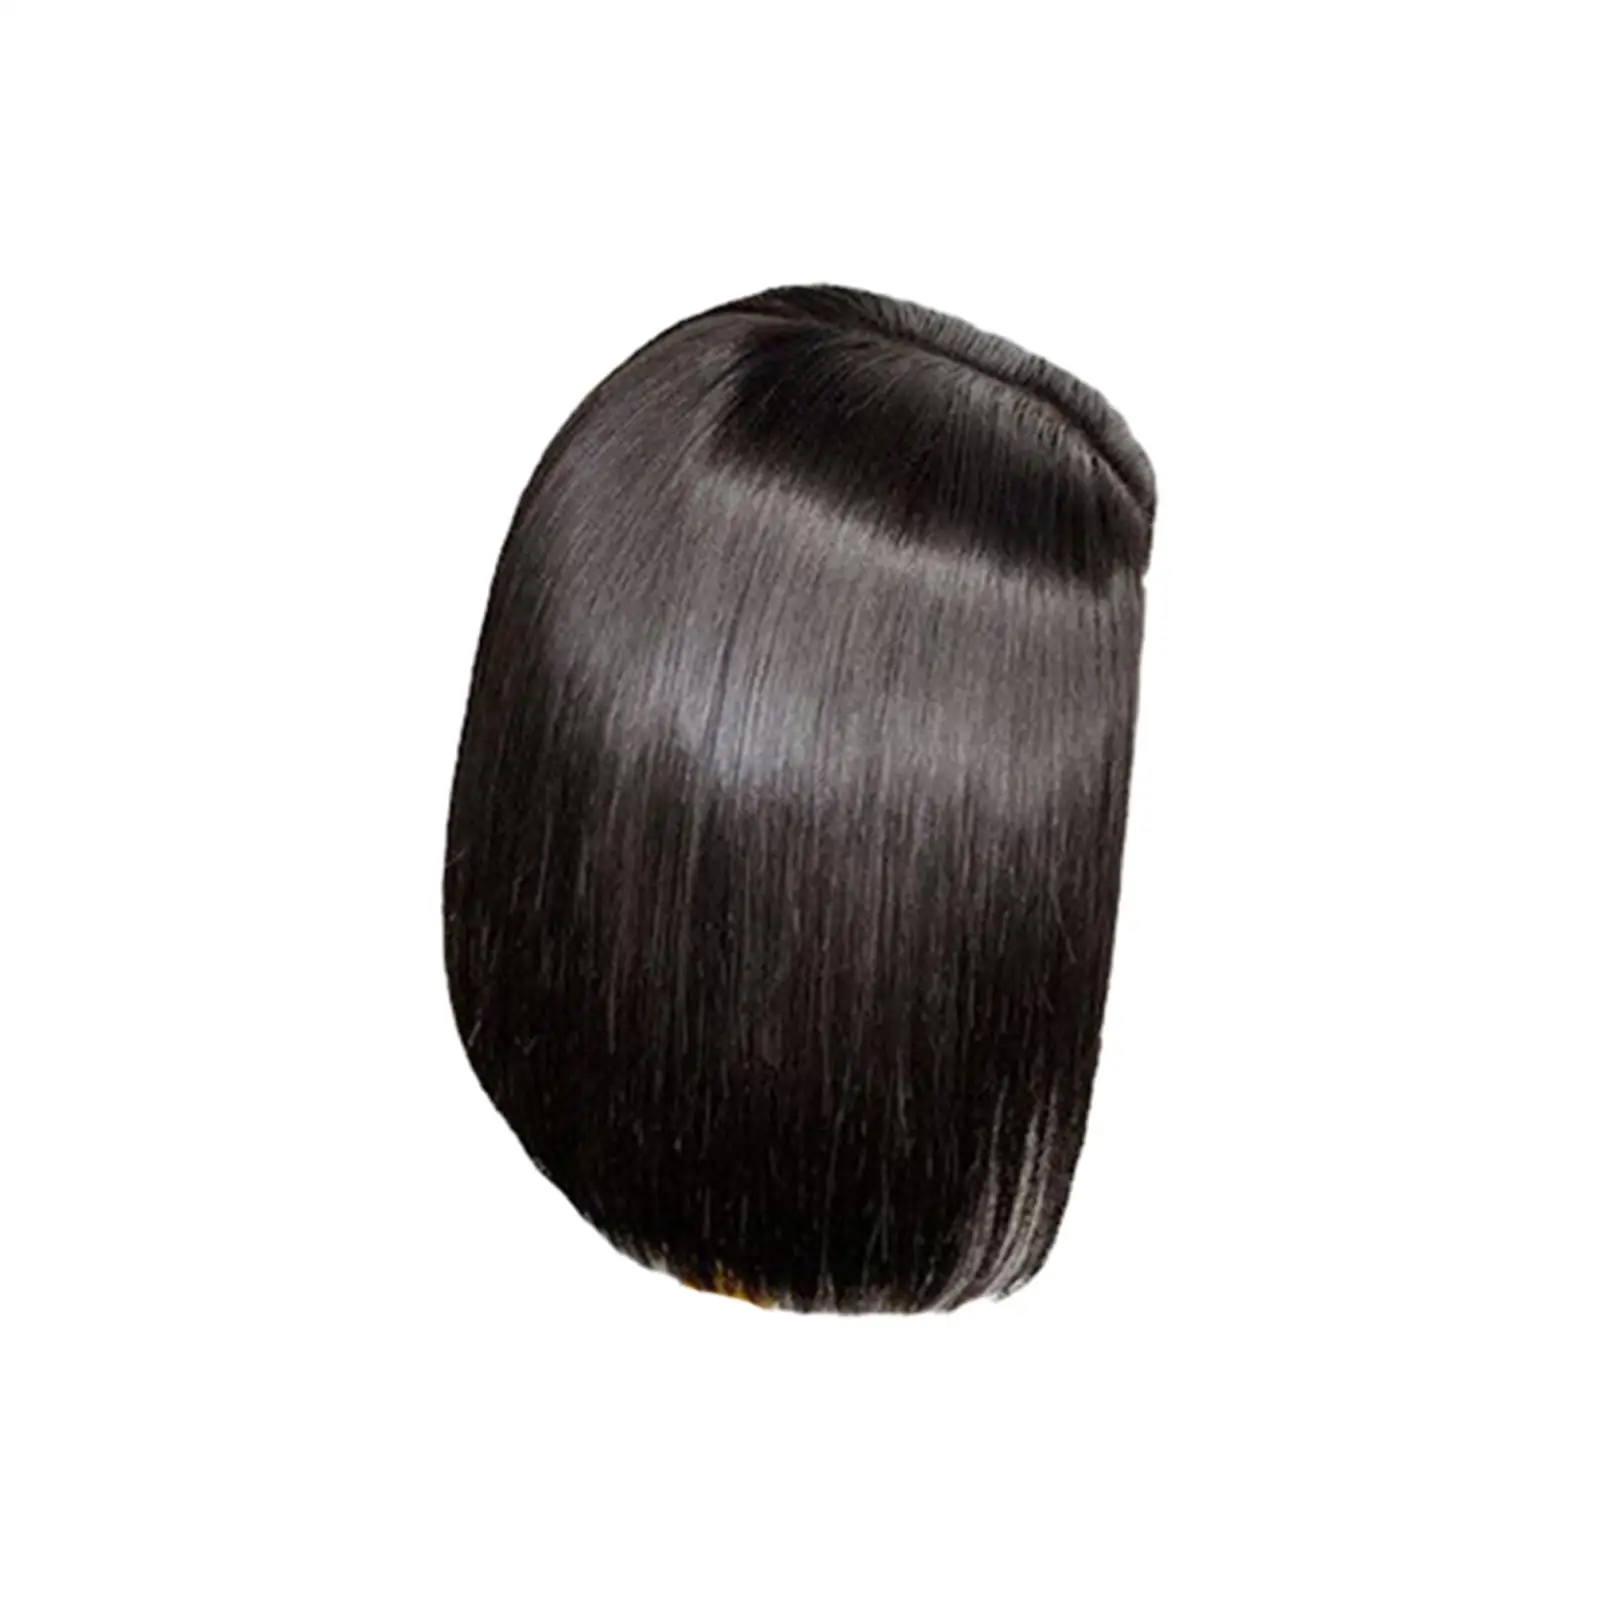 Short Hair Wig Short Bob Hair Wig Easy to Use Machine Made Short Bob Straight Hair Wig Bob Wig for Party Daily Women